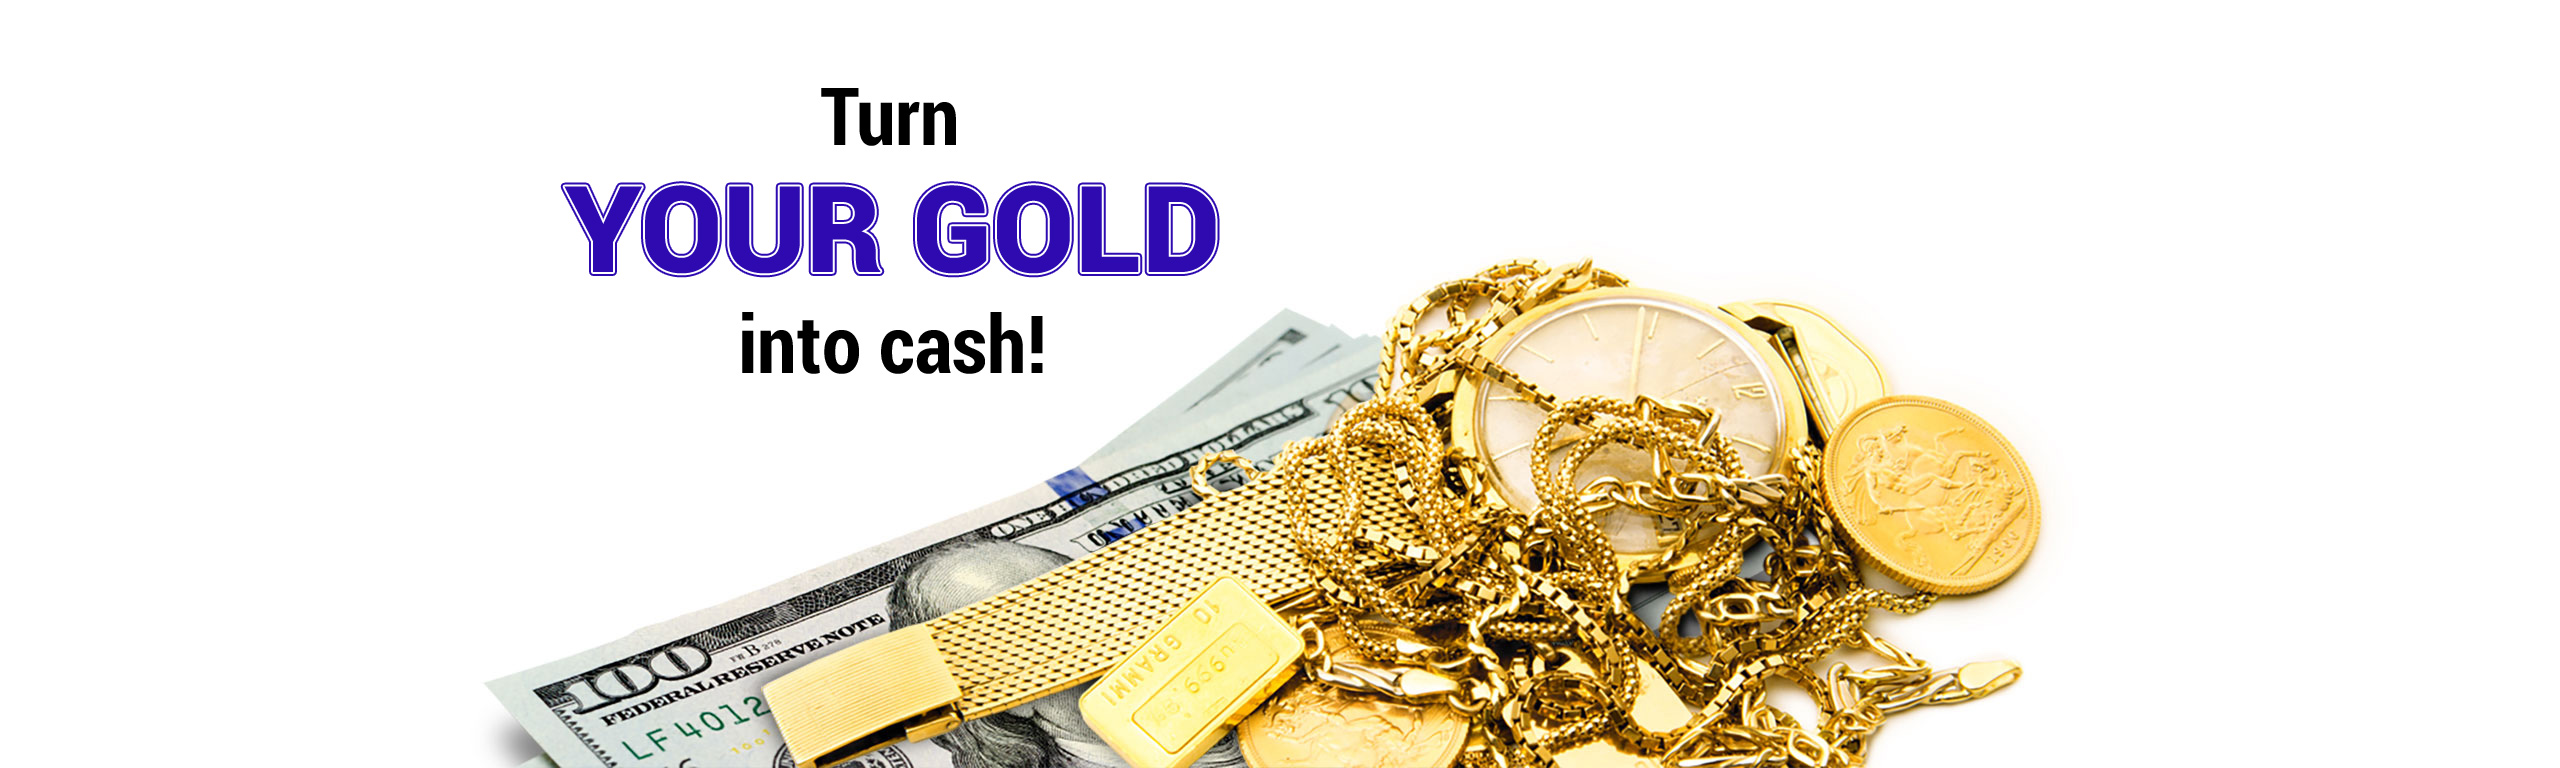 Turn Your Gold into Cash